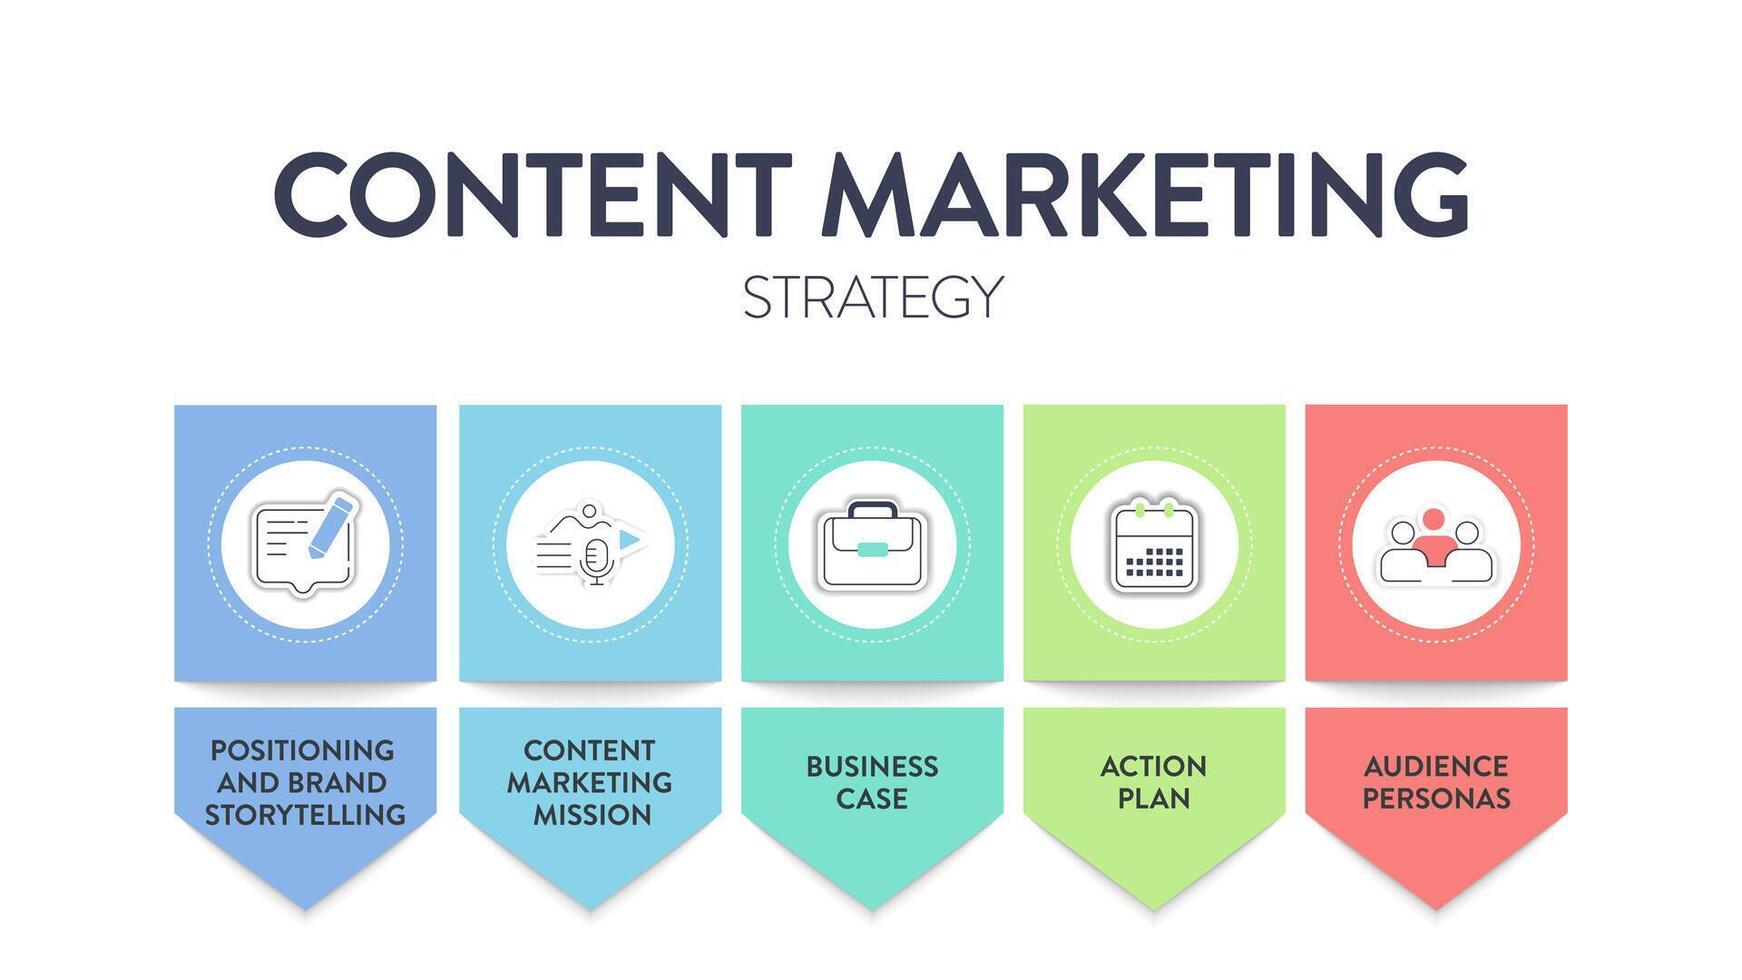 Content Marketing Strategy model chart diagram infographic template with icon vector has positioning and brand storytelling, content marketing mission, business case, action plan and audience personas